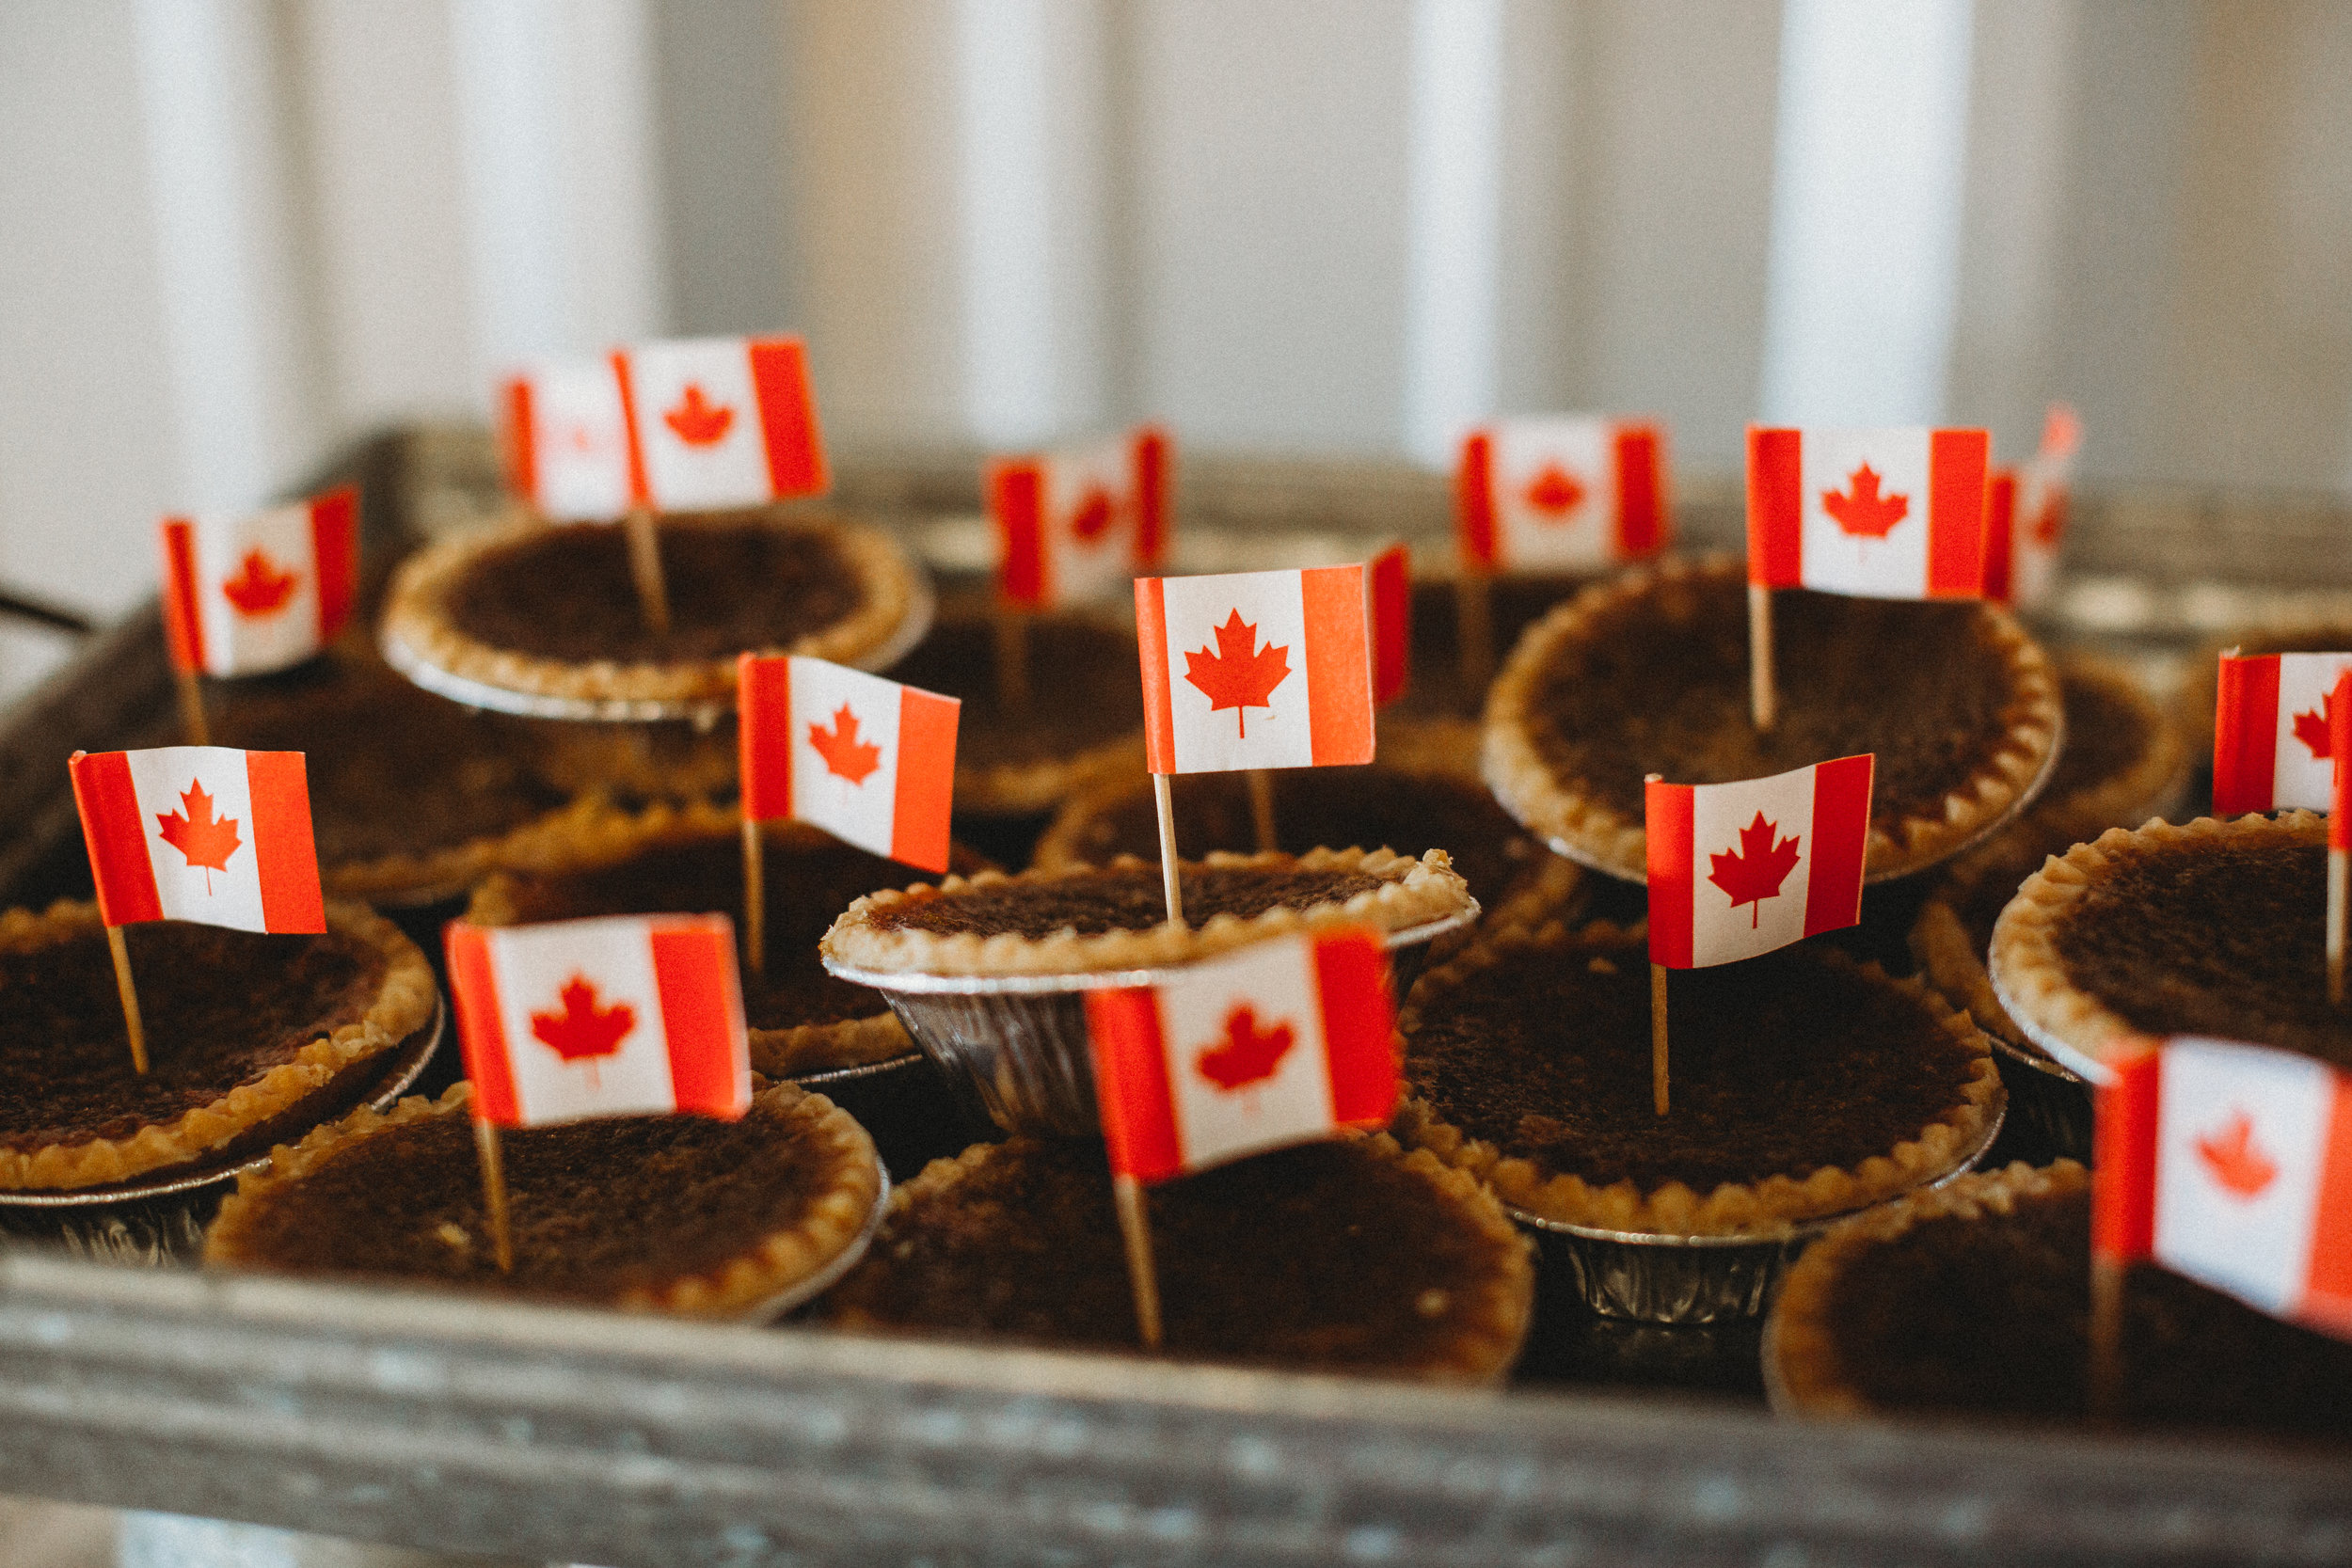  Delicious pies with Canadian flags representing the brides hometown in Canada #tealawardphotography #texasweddings #amarillophotographer #amarilloweddingphotographer #emotionalphotography #intimateweddingphotography #weddingday #weddingphotos #texasphotographer #inspiredwedding #intimatewedding #weddingformals #bigday #portraits 